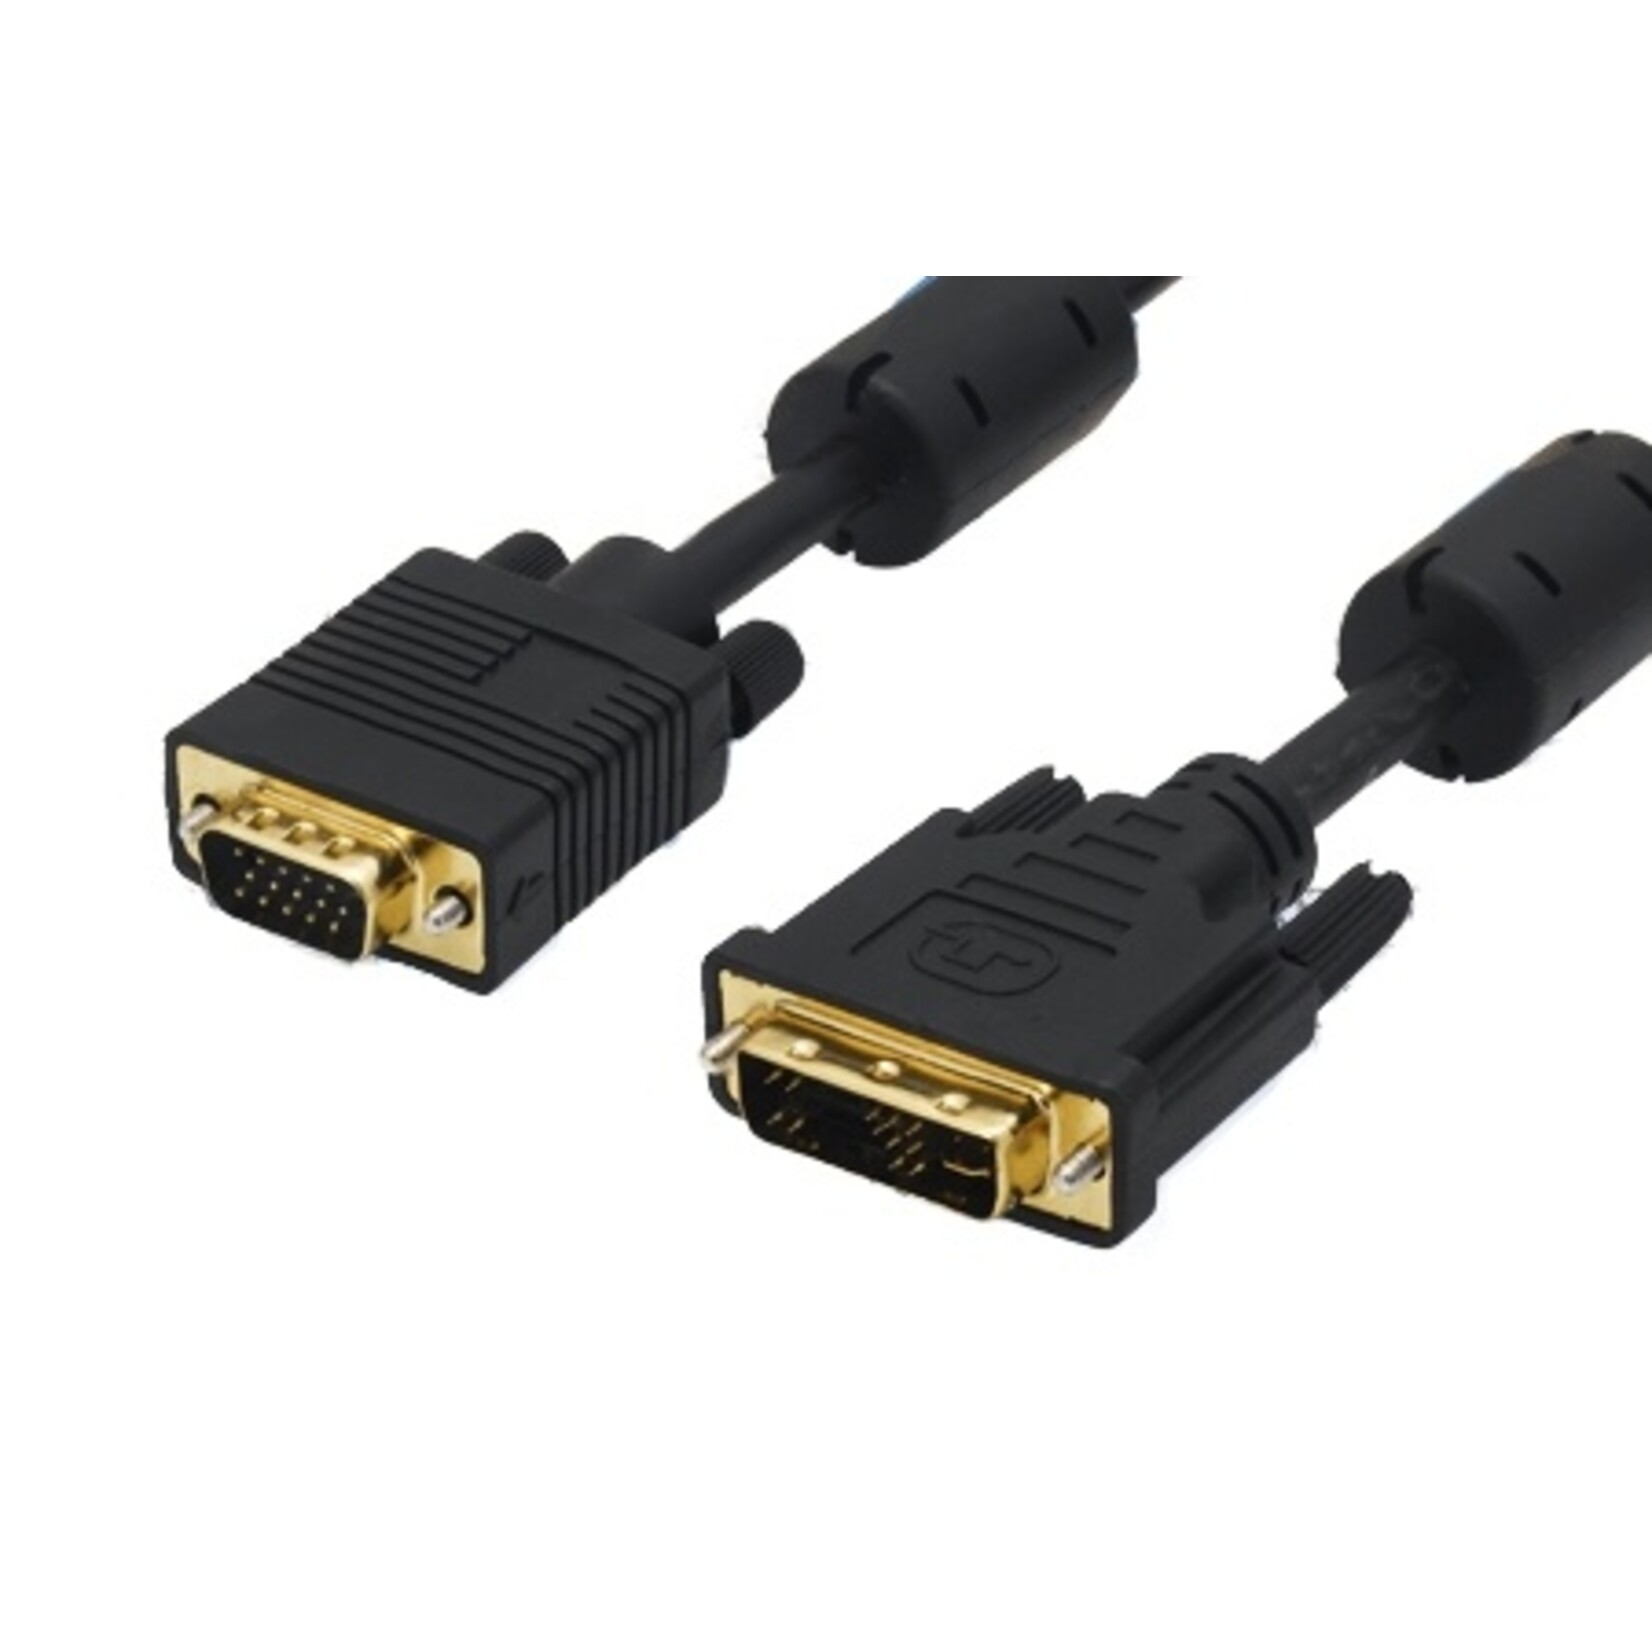 3 Meter DVI to VGA Cable